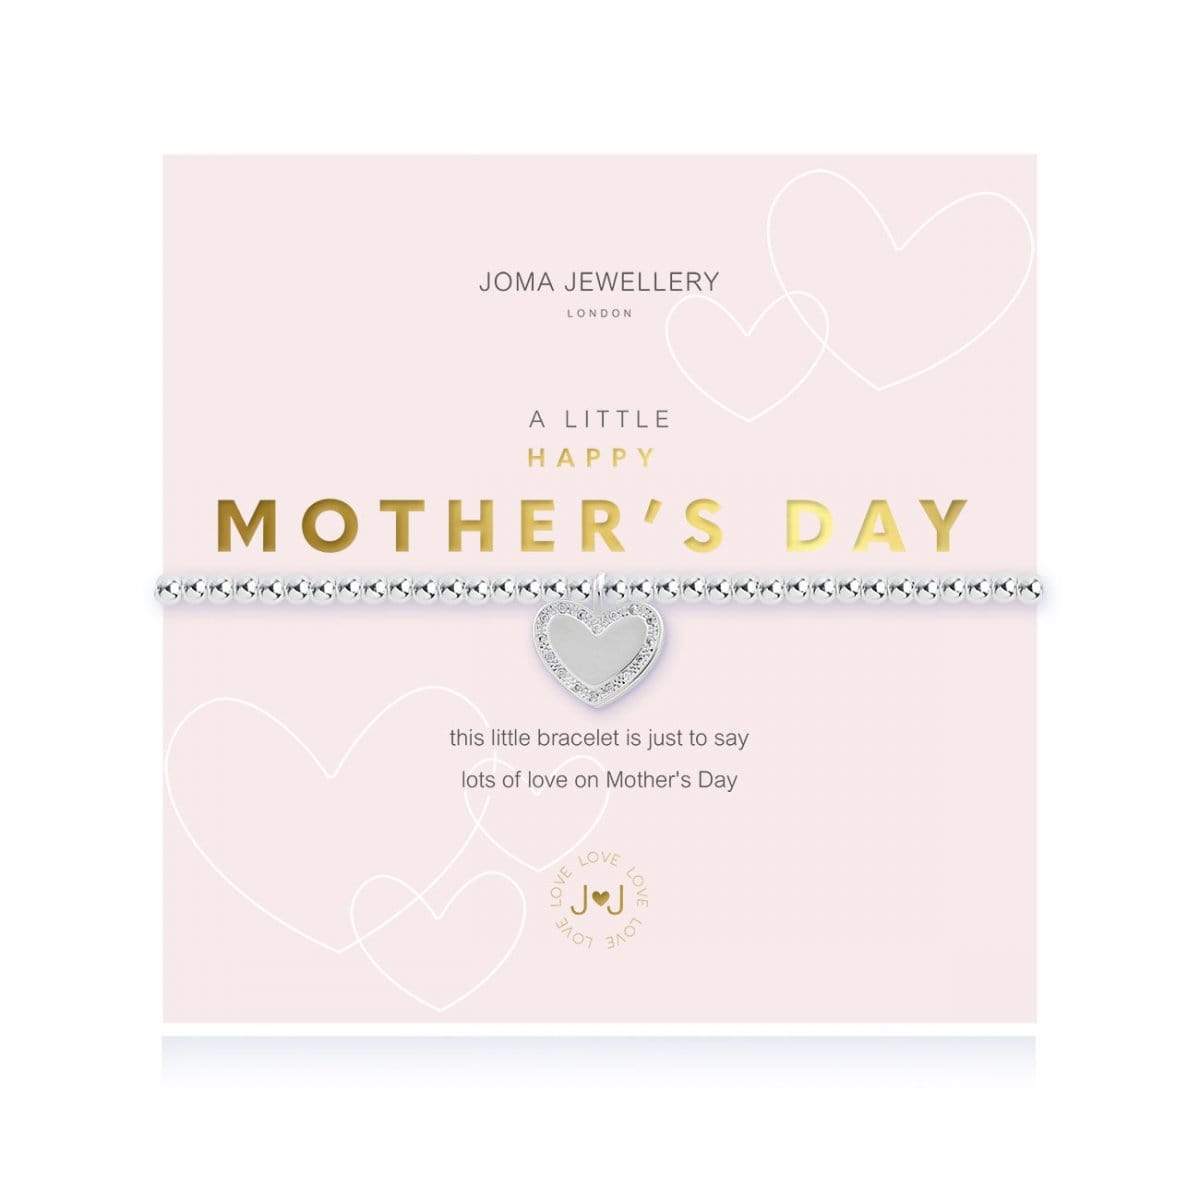 A LITTLE HAPPY MOTHER'S DAY BRACELET by Joma Jewellery - Bumbles & Boo